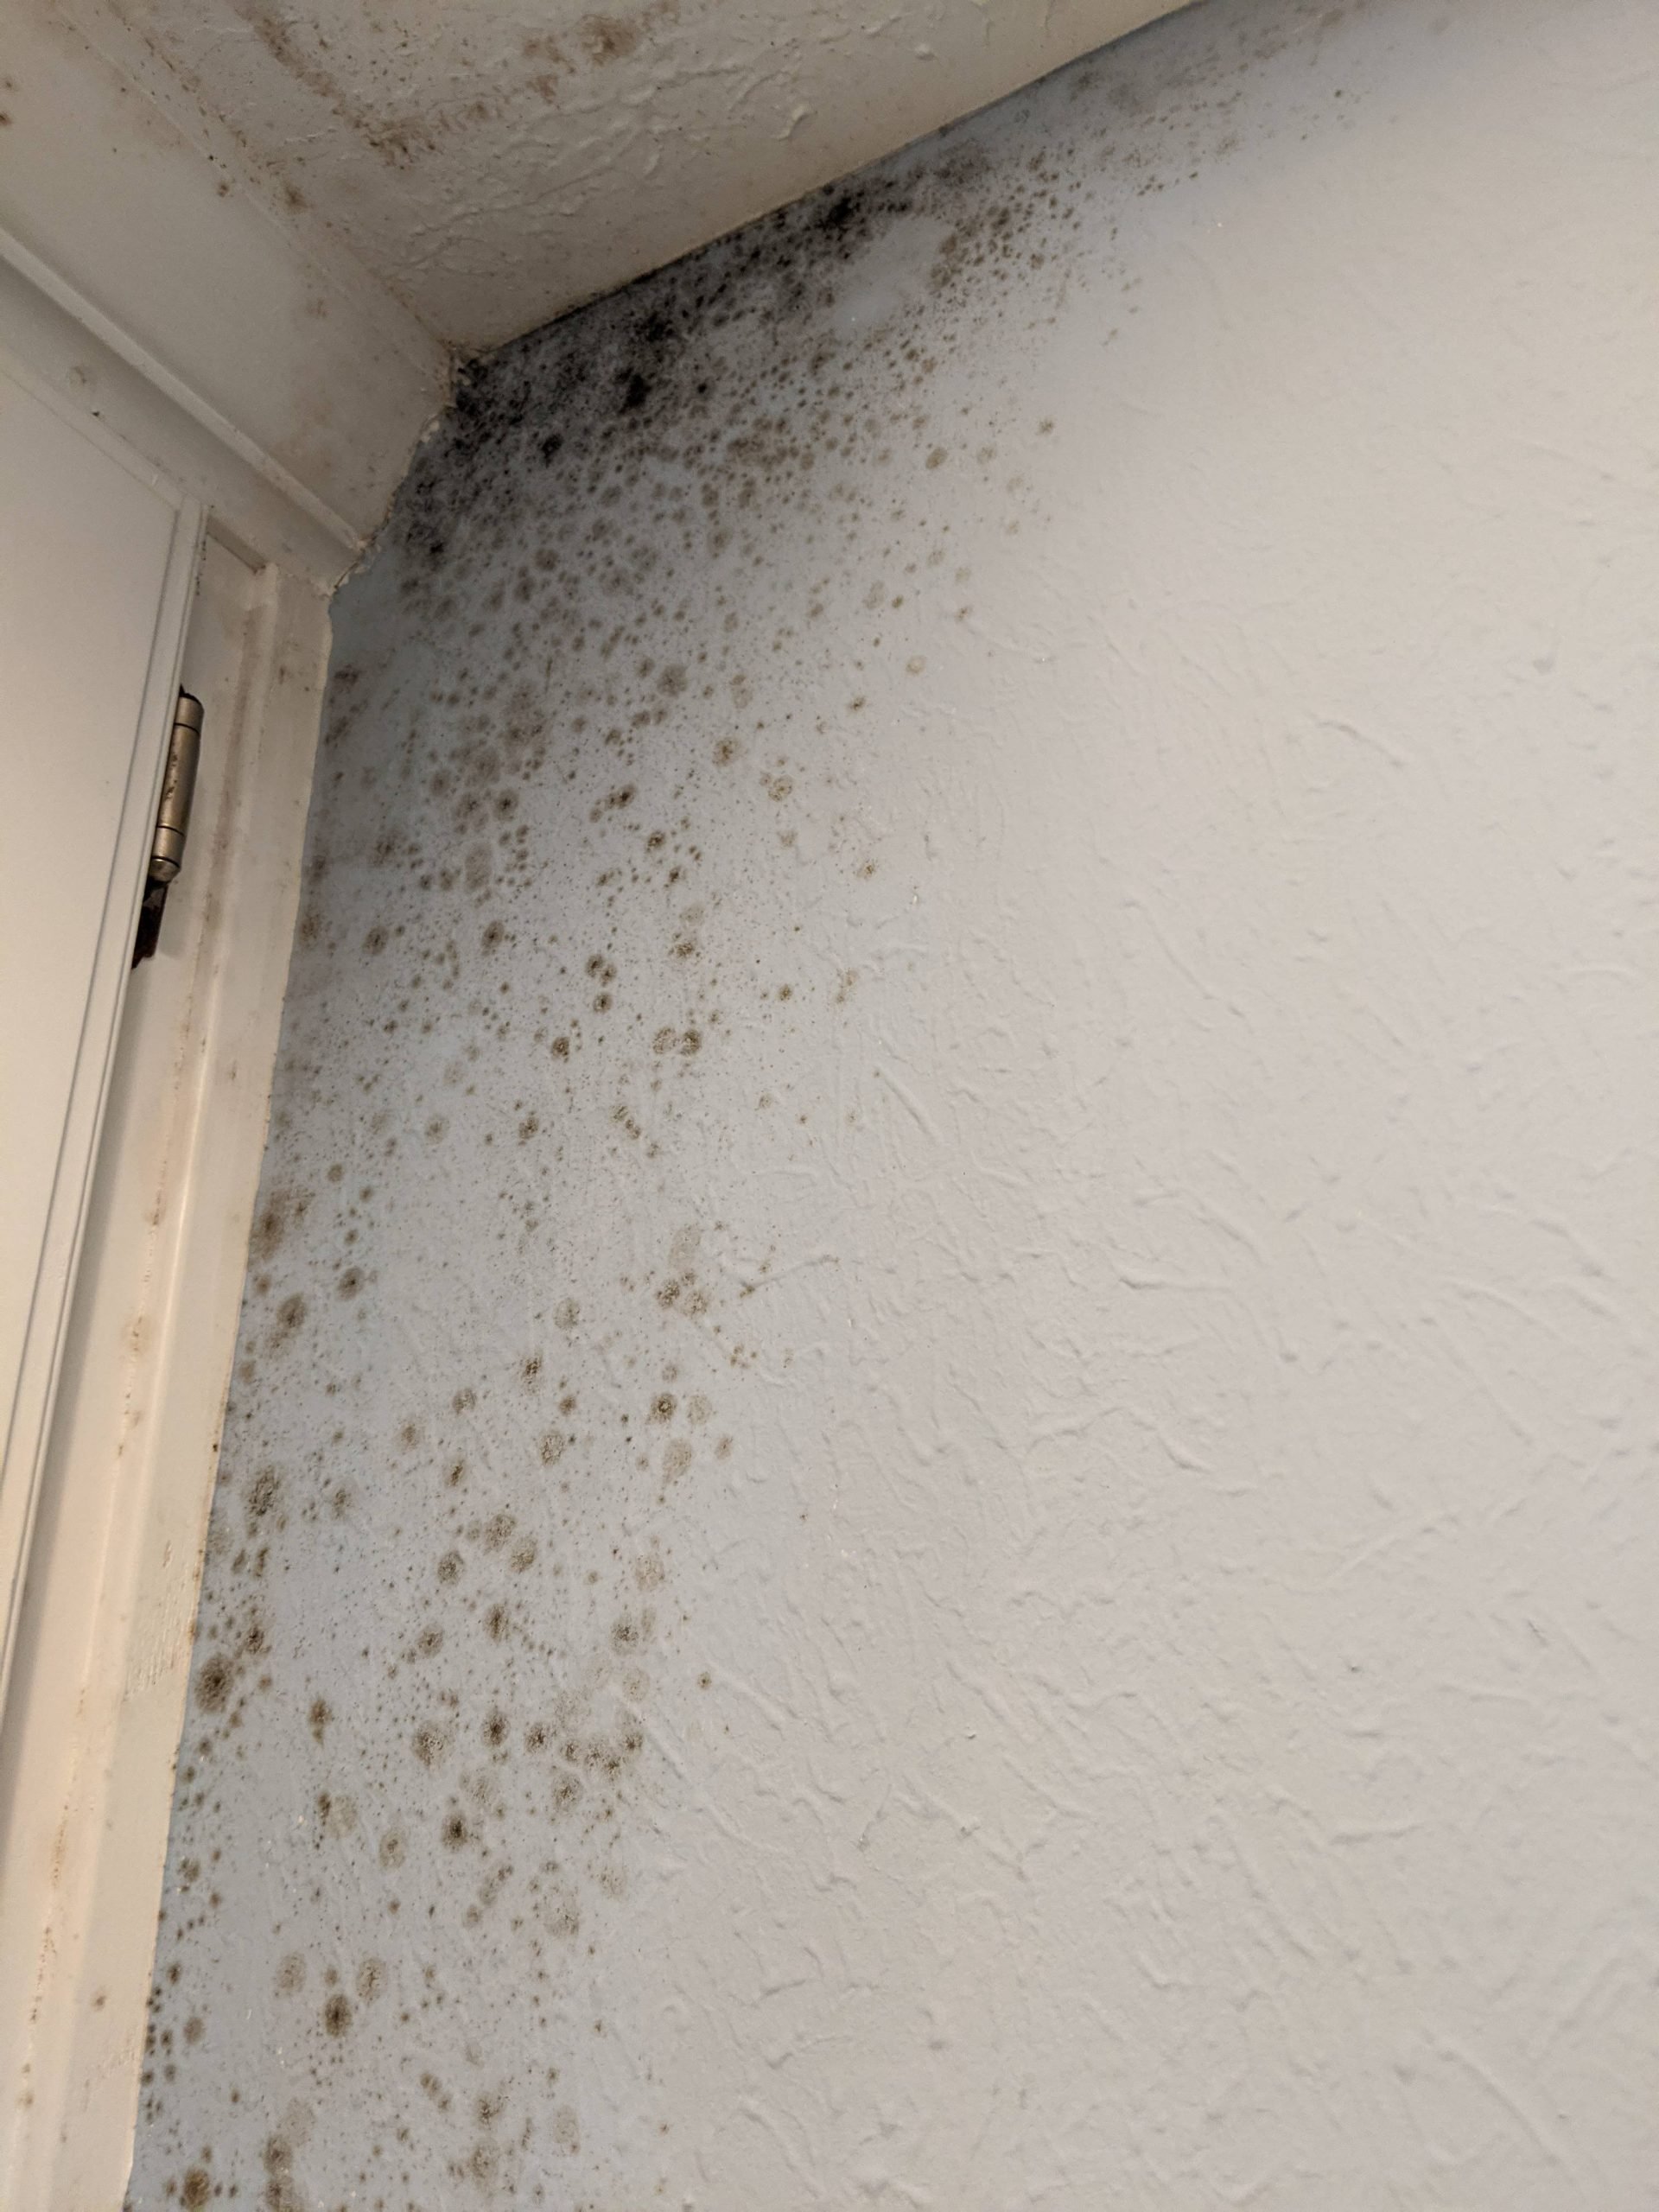 How to clean mold off bathroom wall? : howto